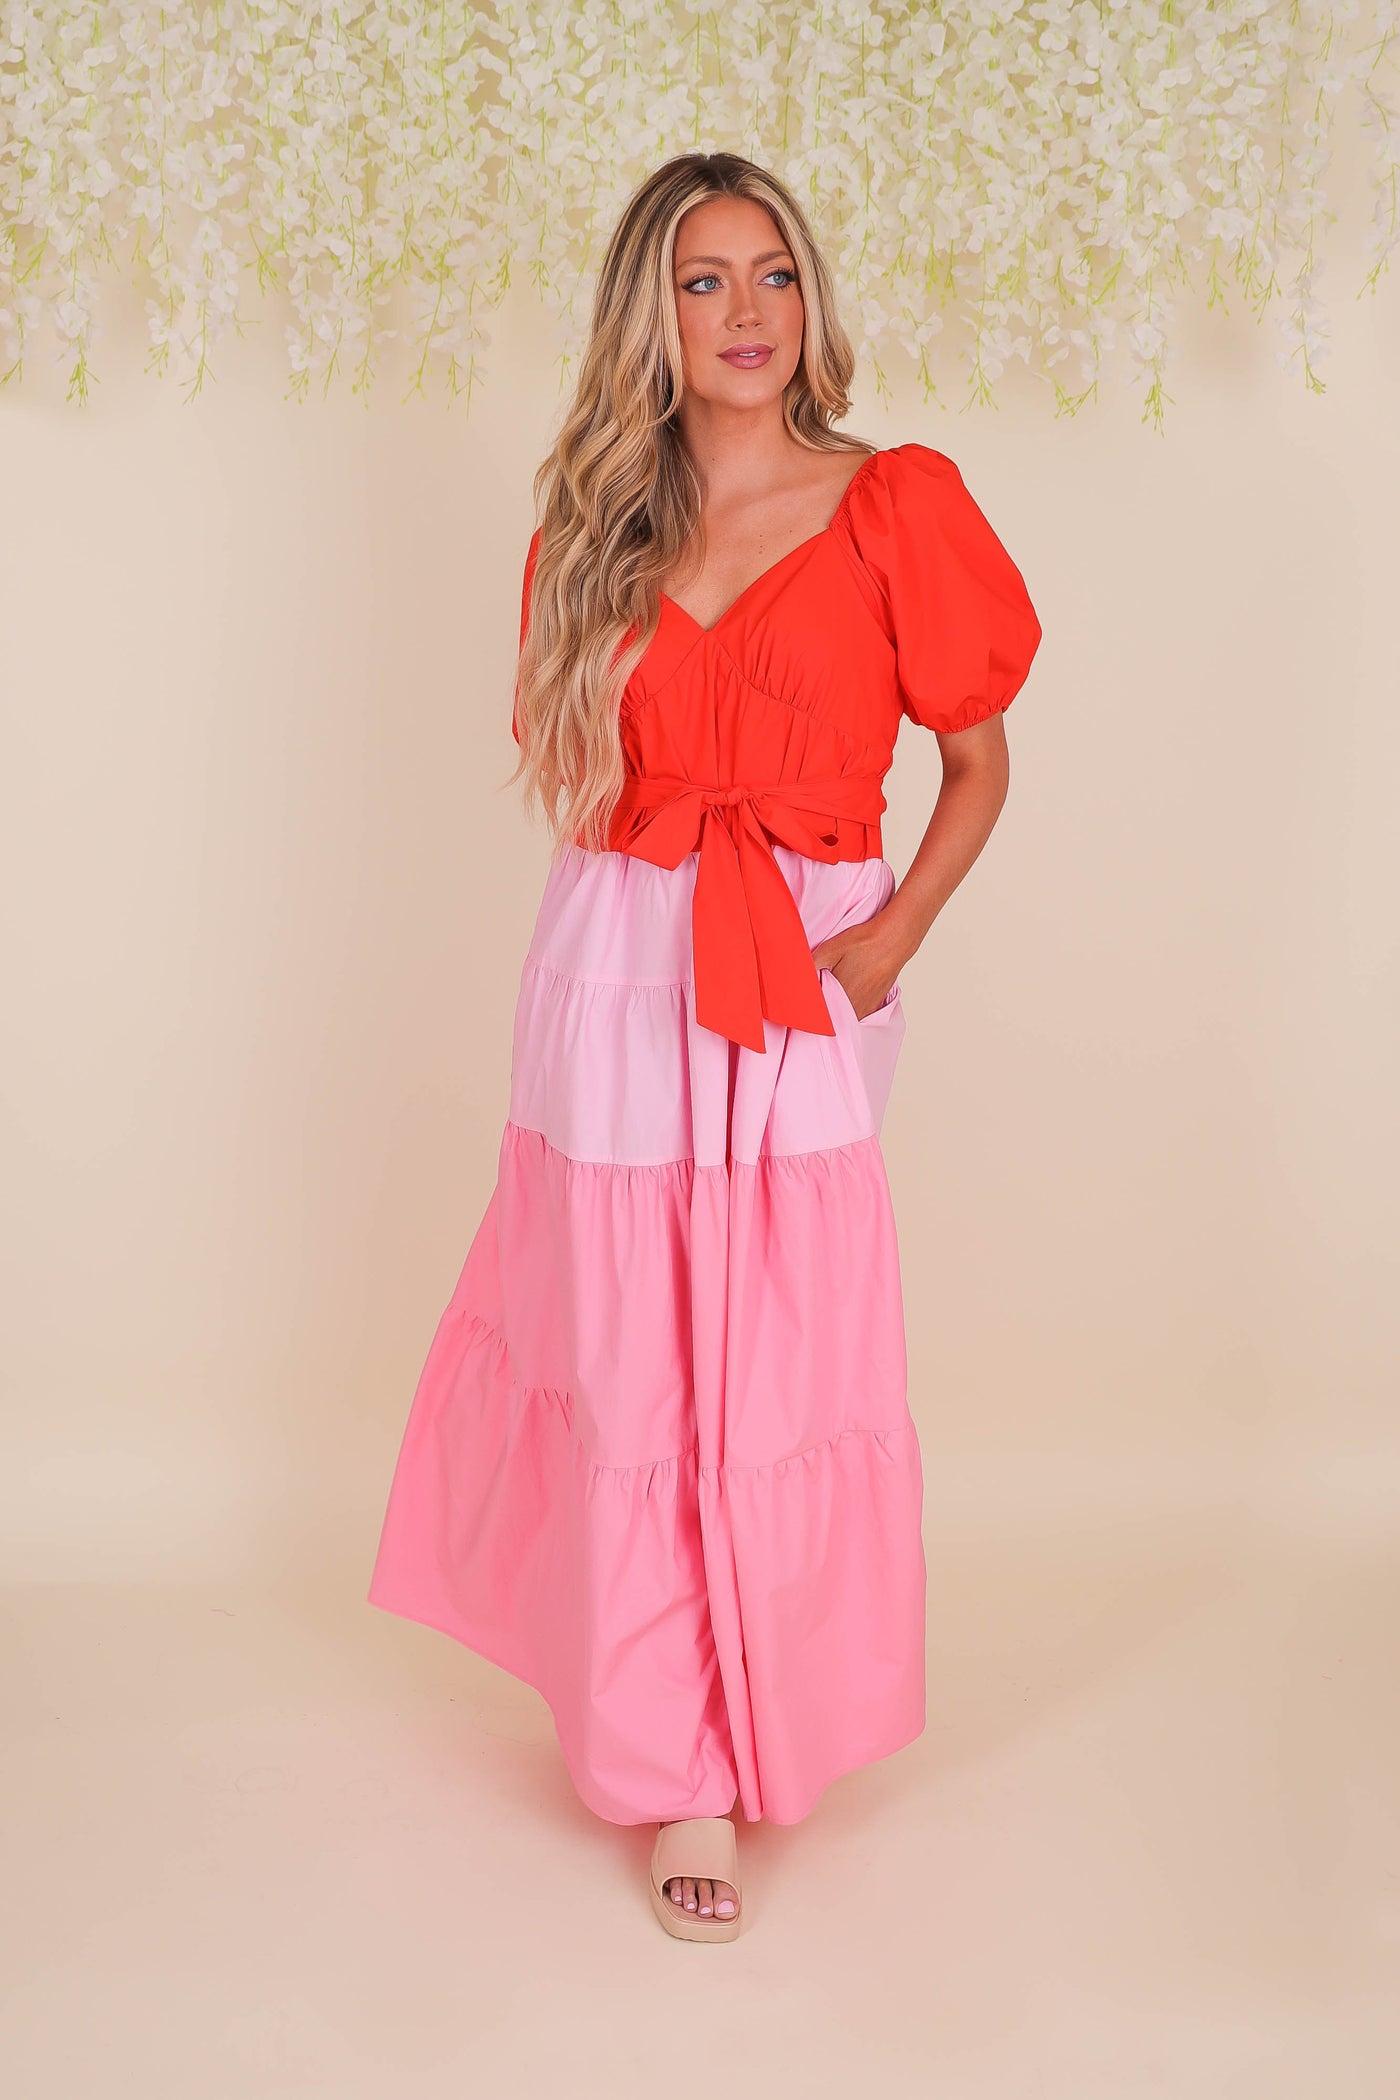 Women's Statement Maxi Dress- Pink and Red Maxi- Ces Femme Maxi Dress